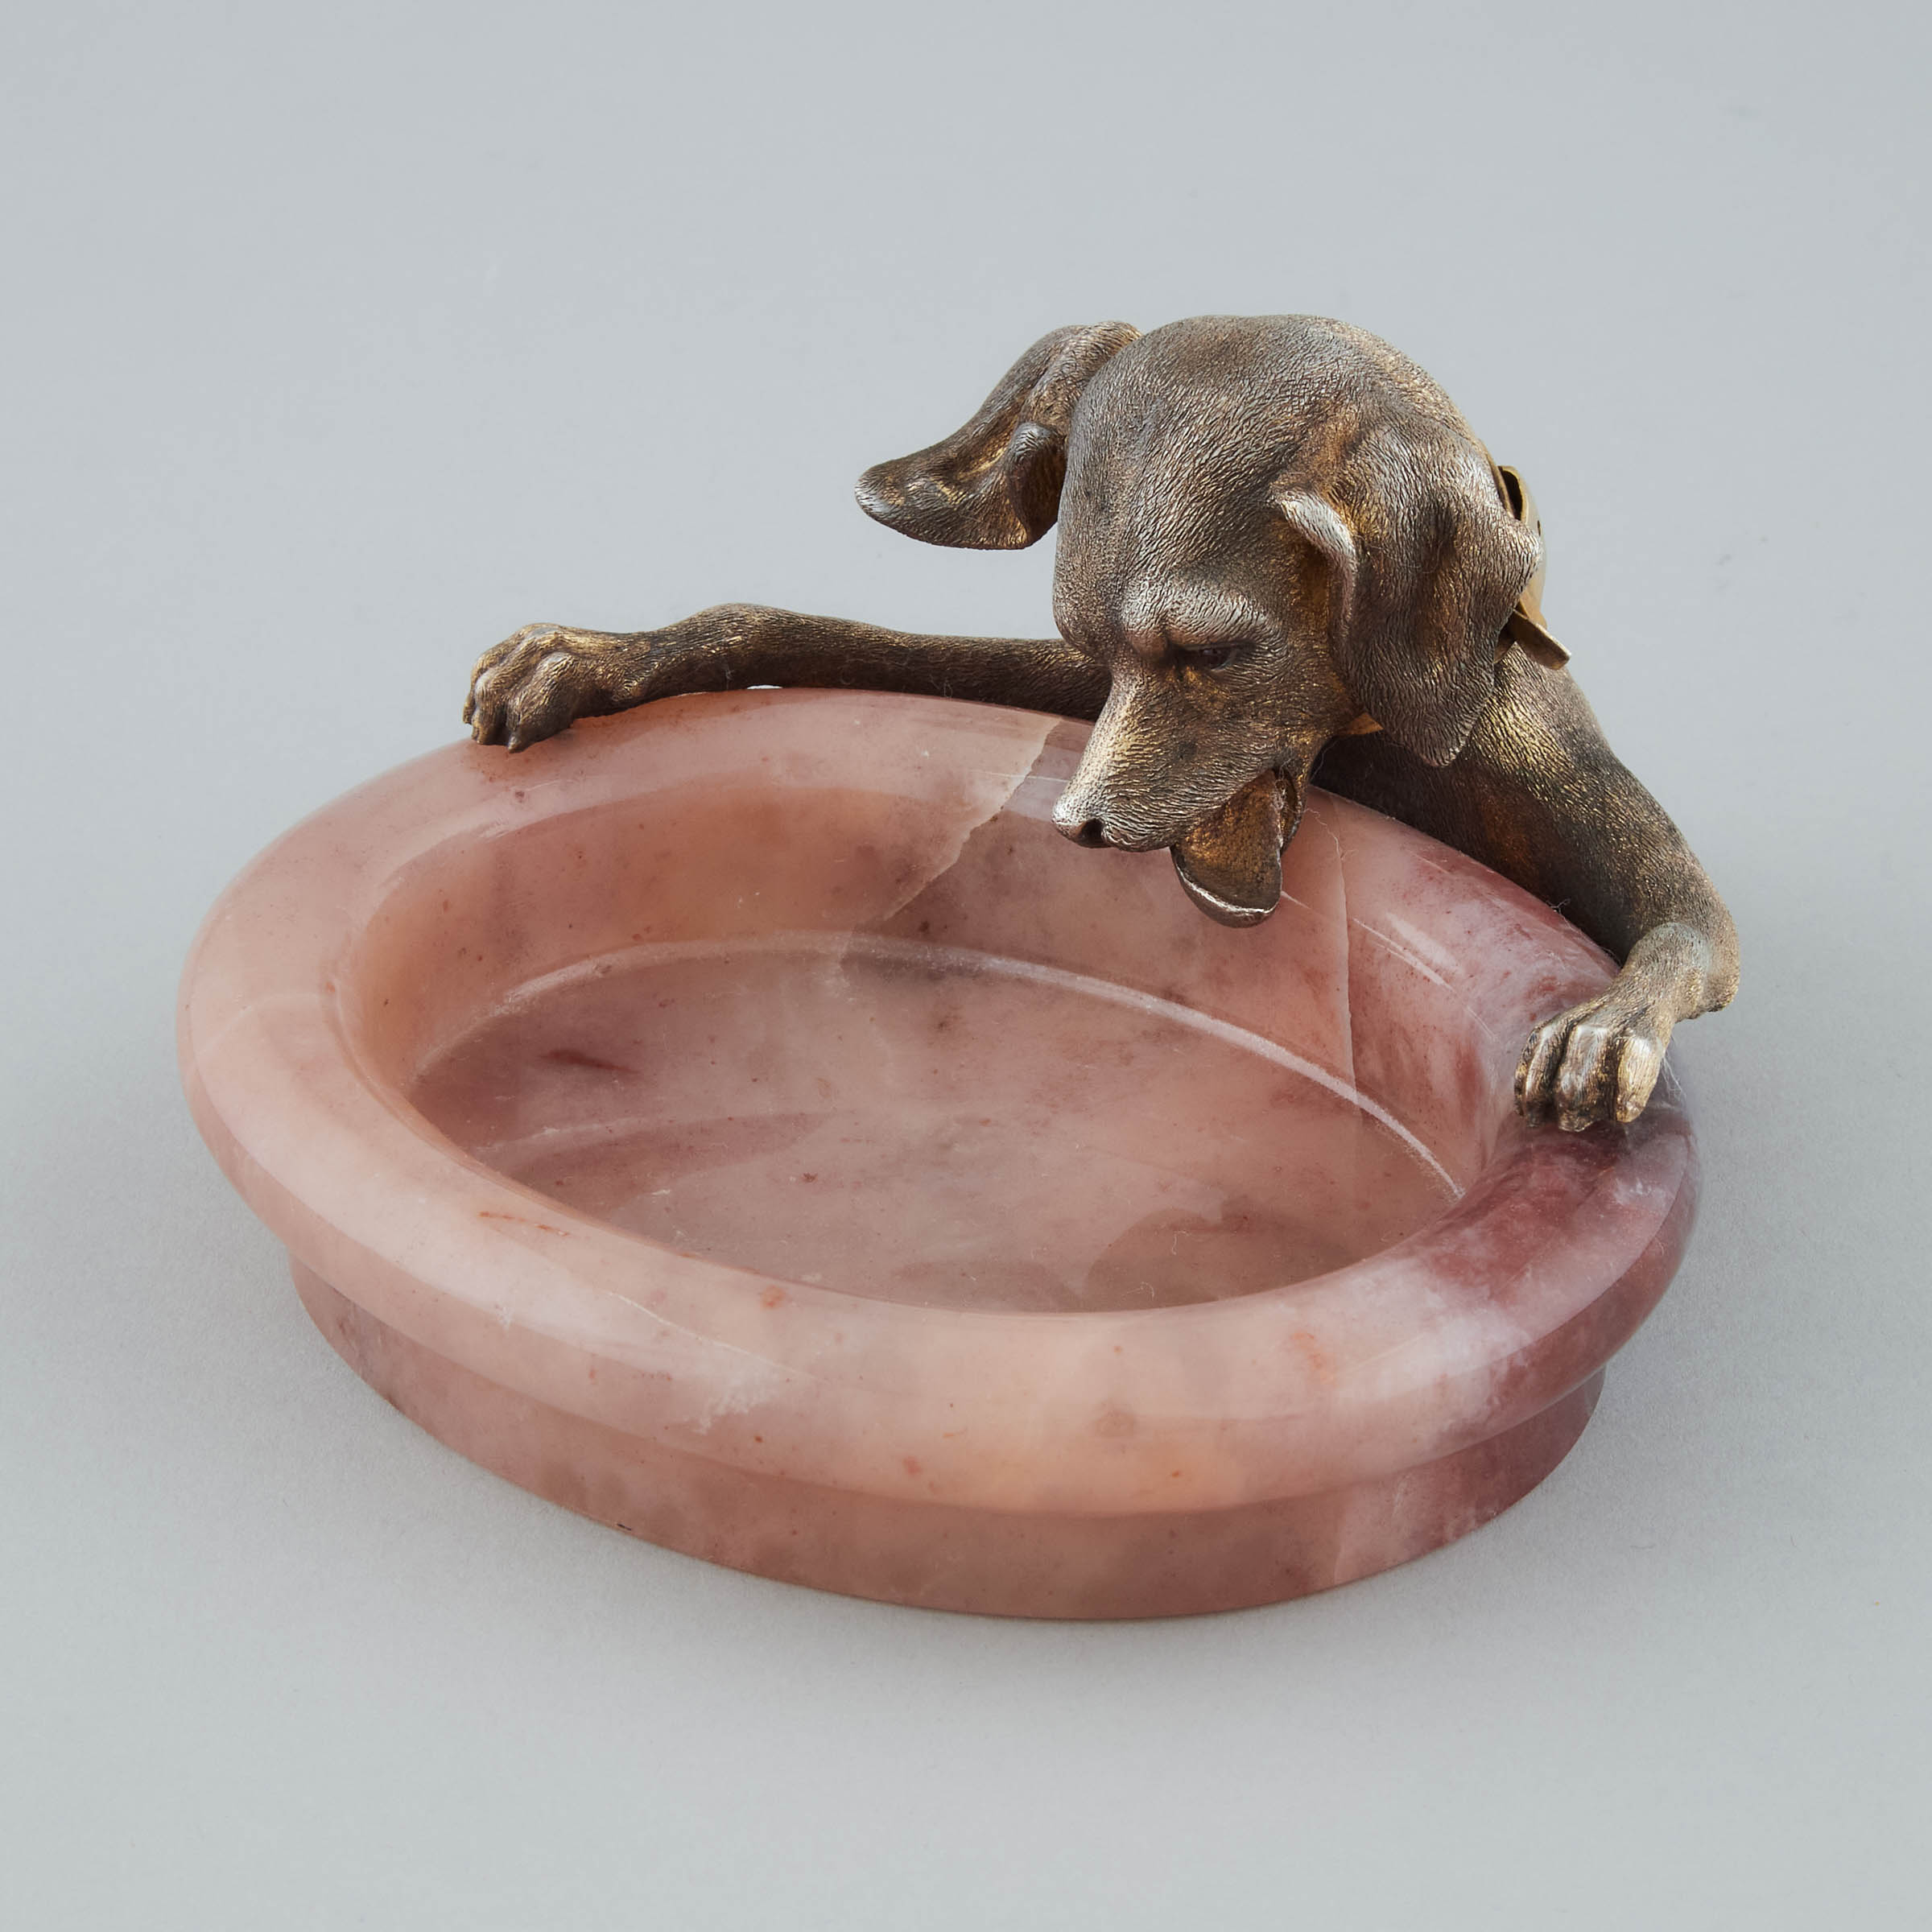 Russian Silver-Gilt and Agate Dog Vesta Ashtray, St. Petersburg, c.1908-17